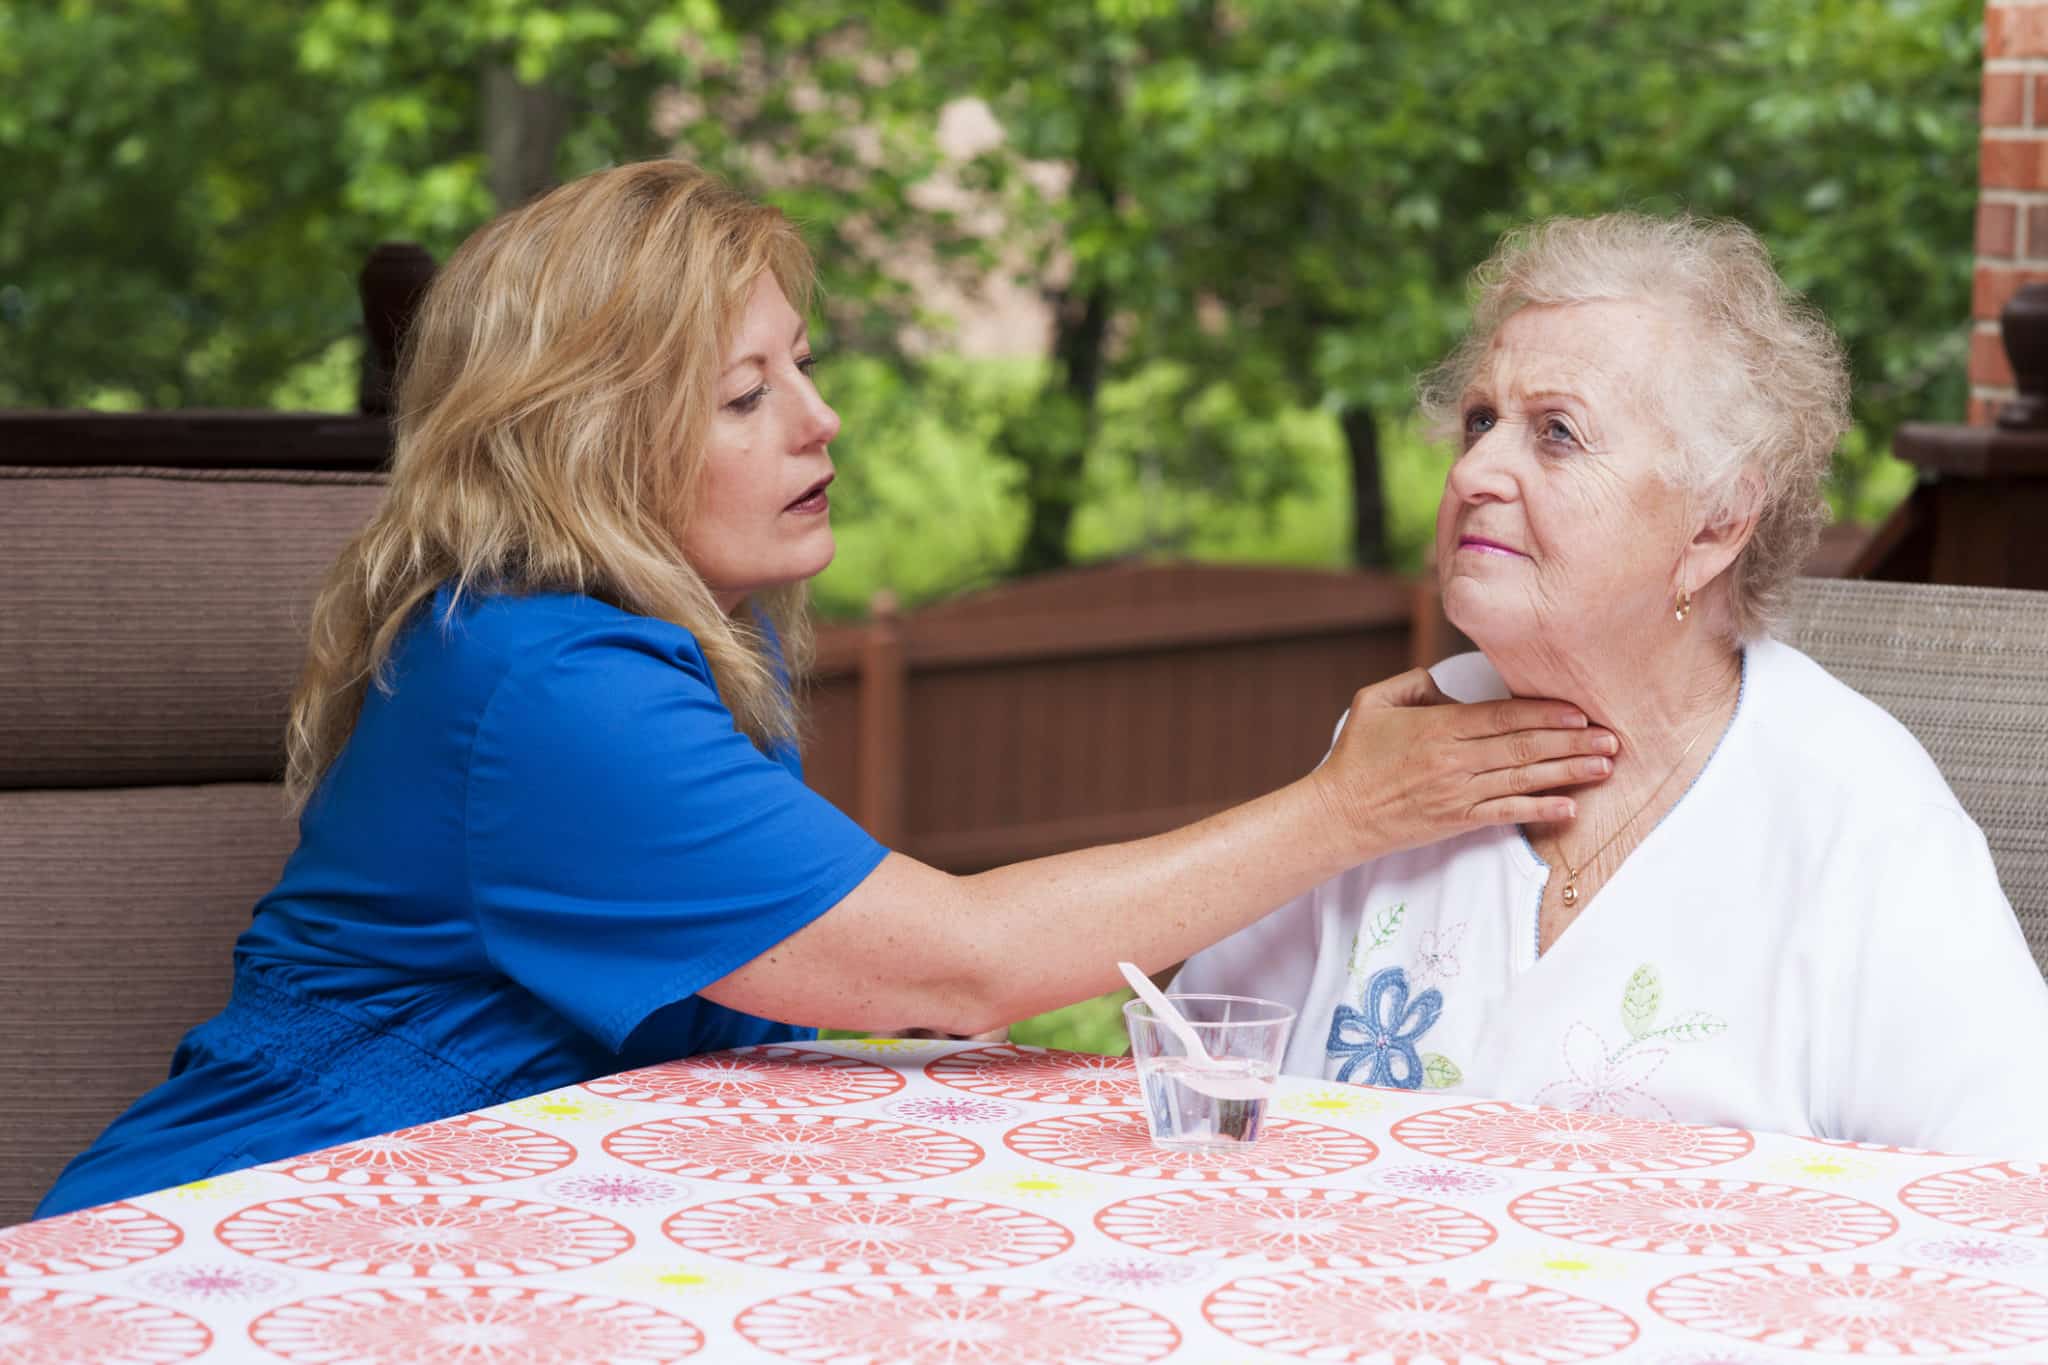 Assessing impaired swallowing after a stroke